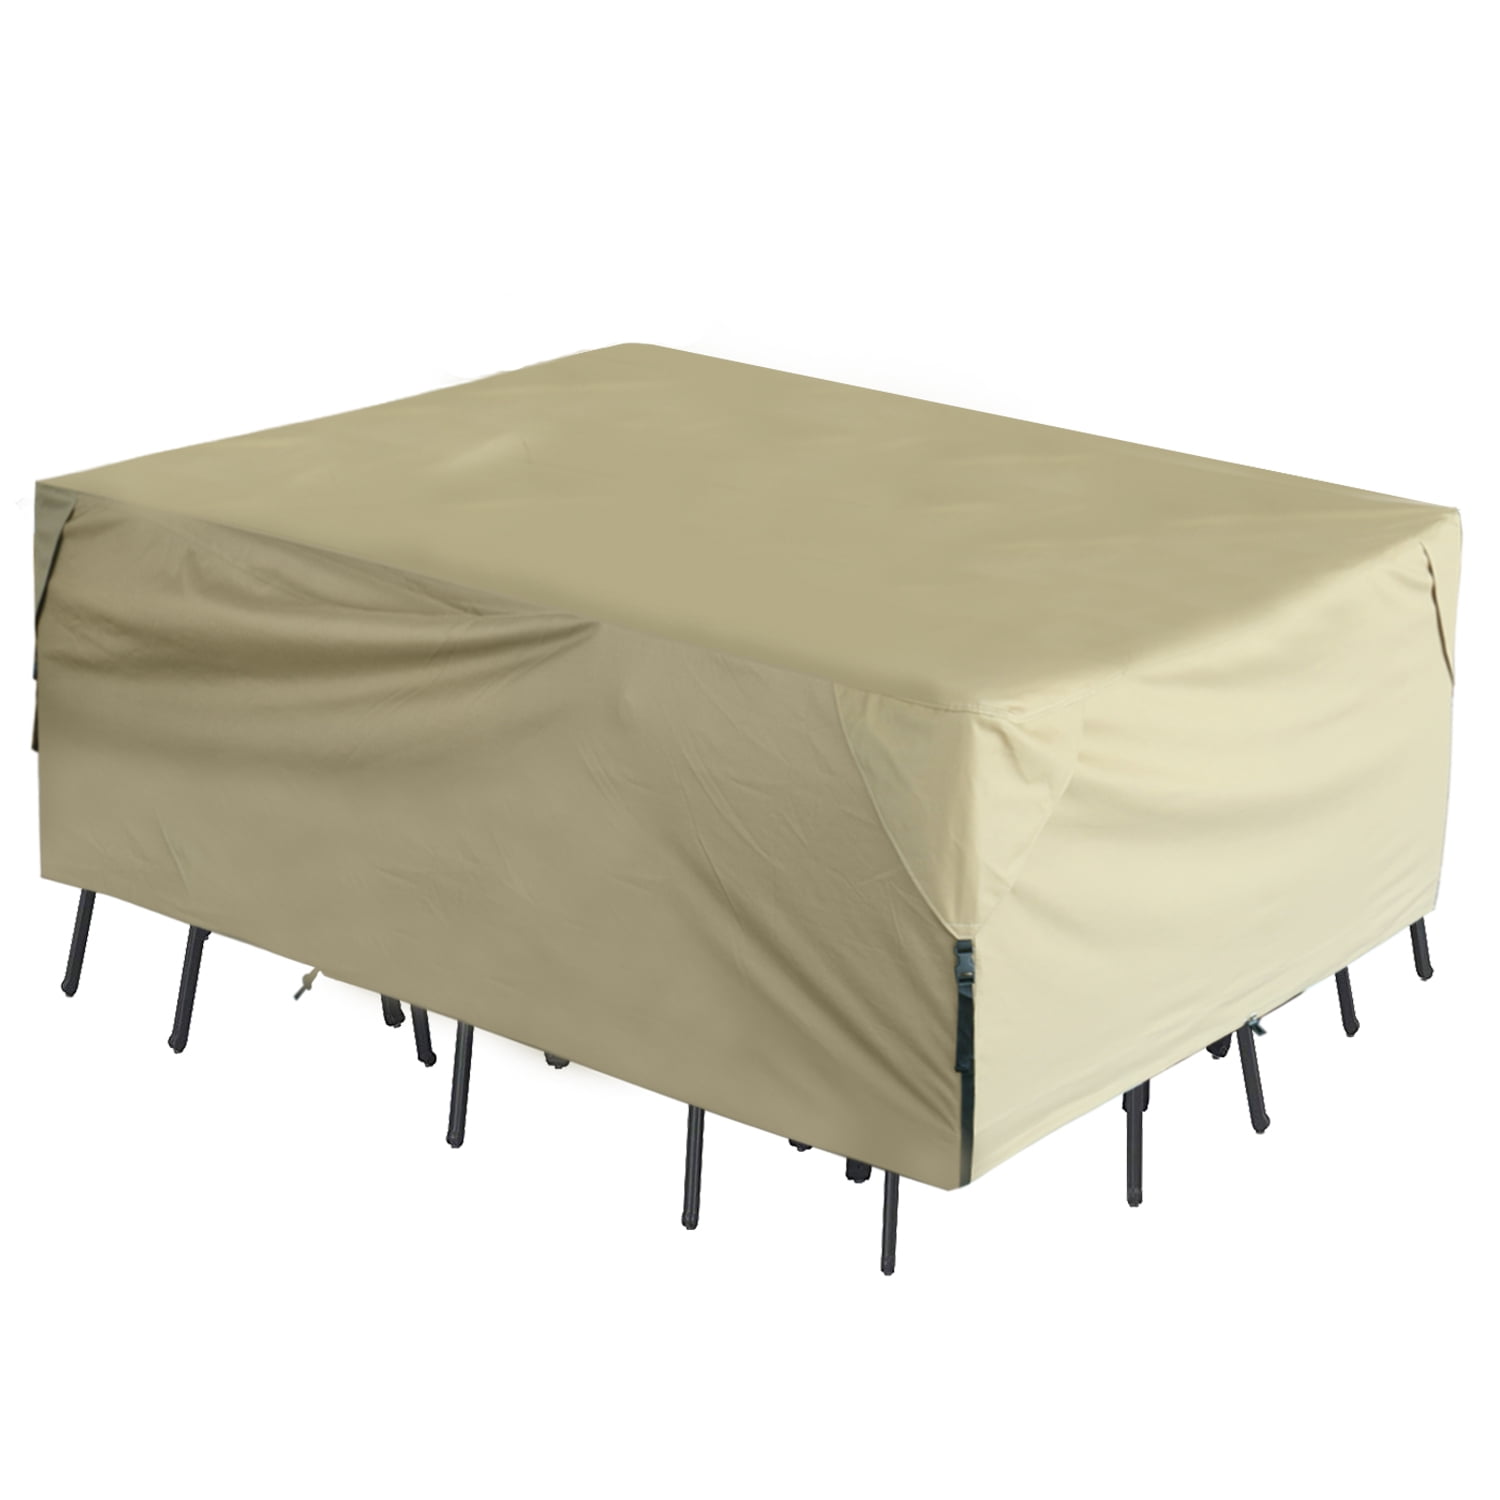 W x30 Details about   600D Waterproof Square/Round Patio Table & Chair Set Cover 60" x60 H L 